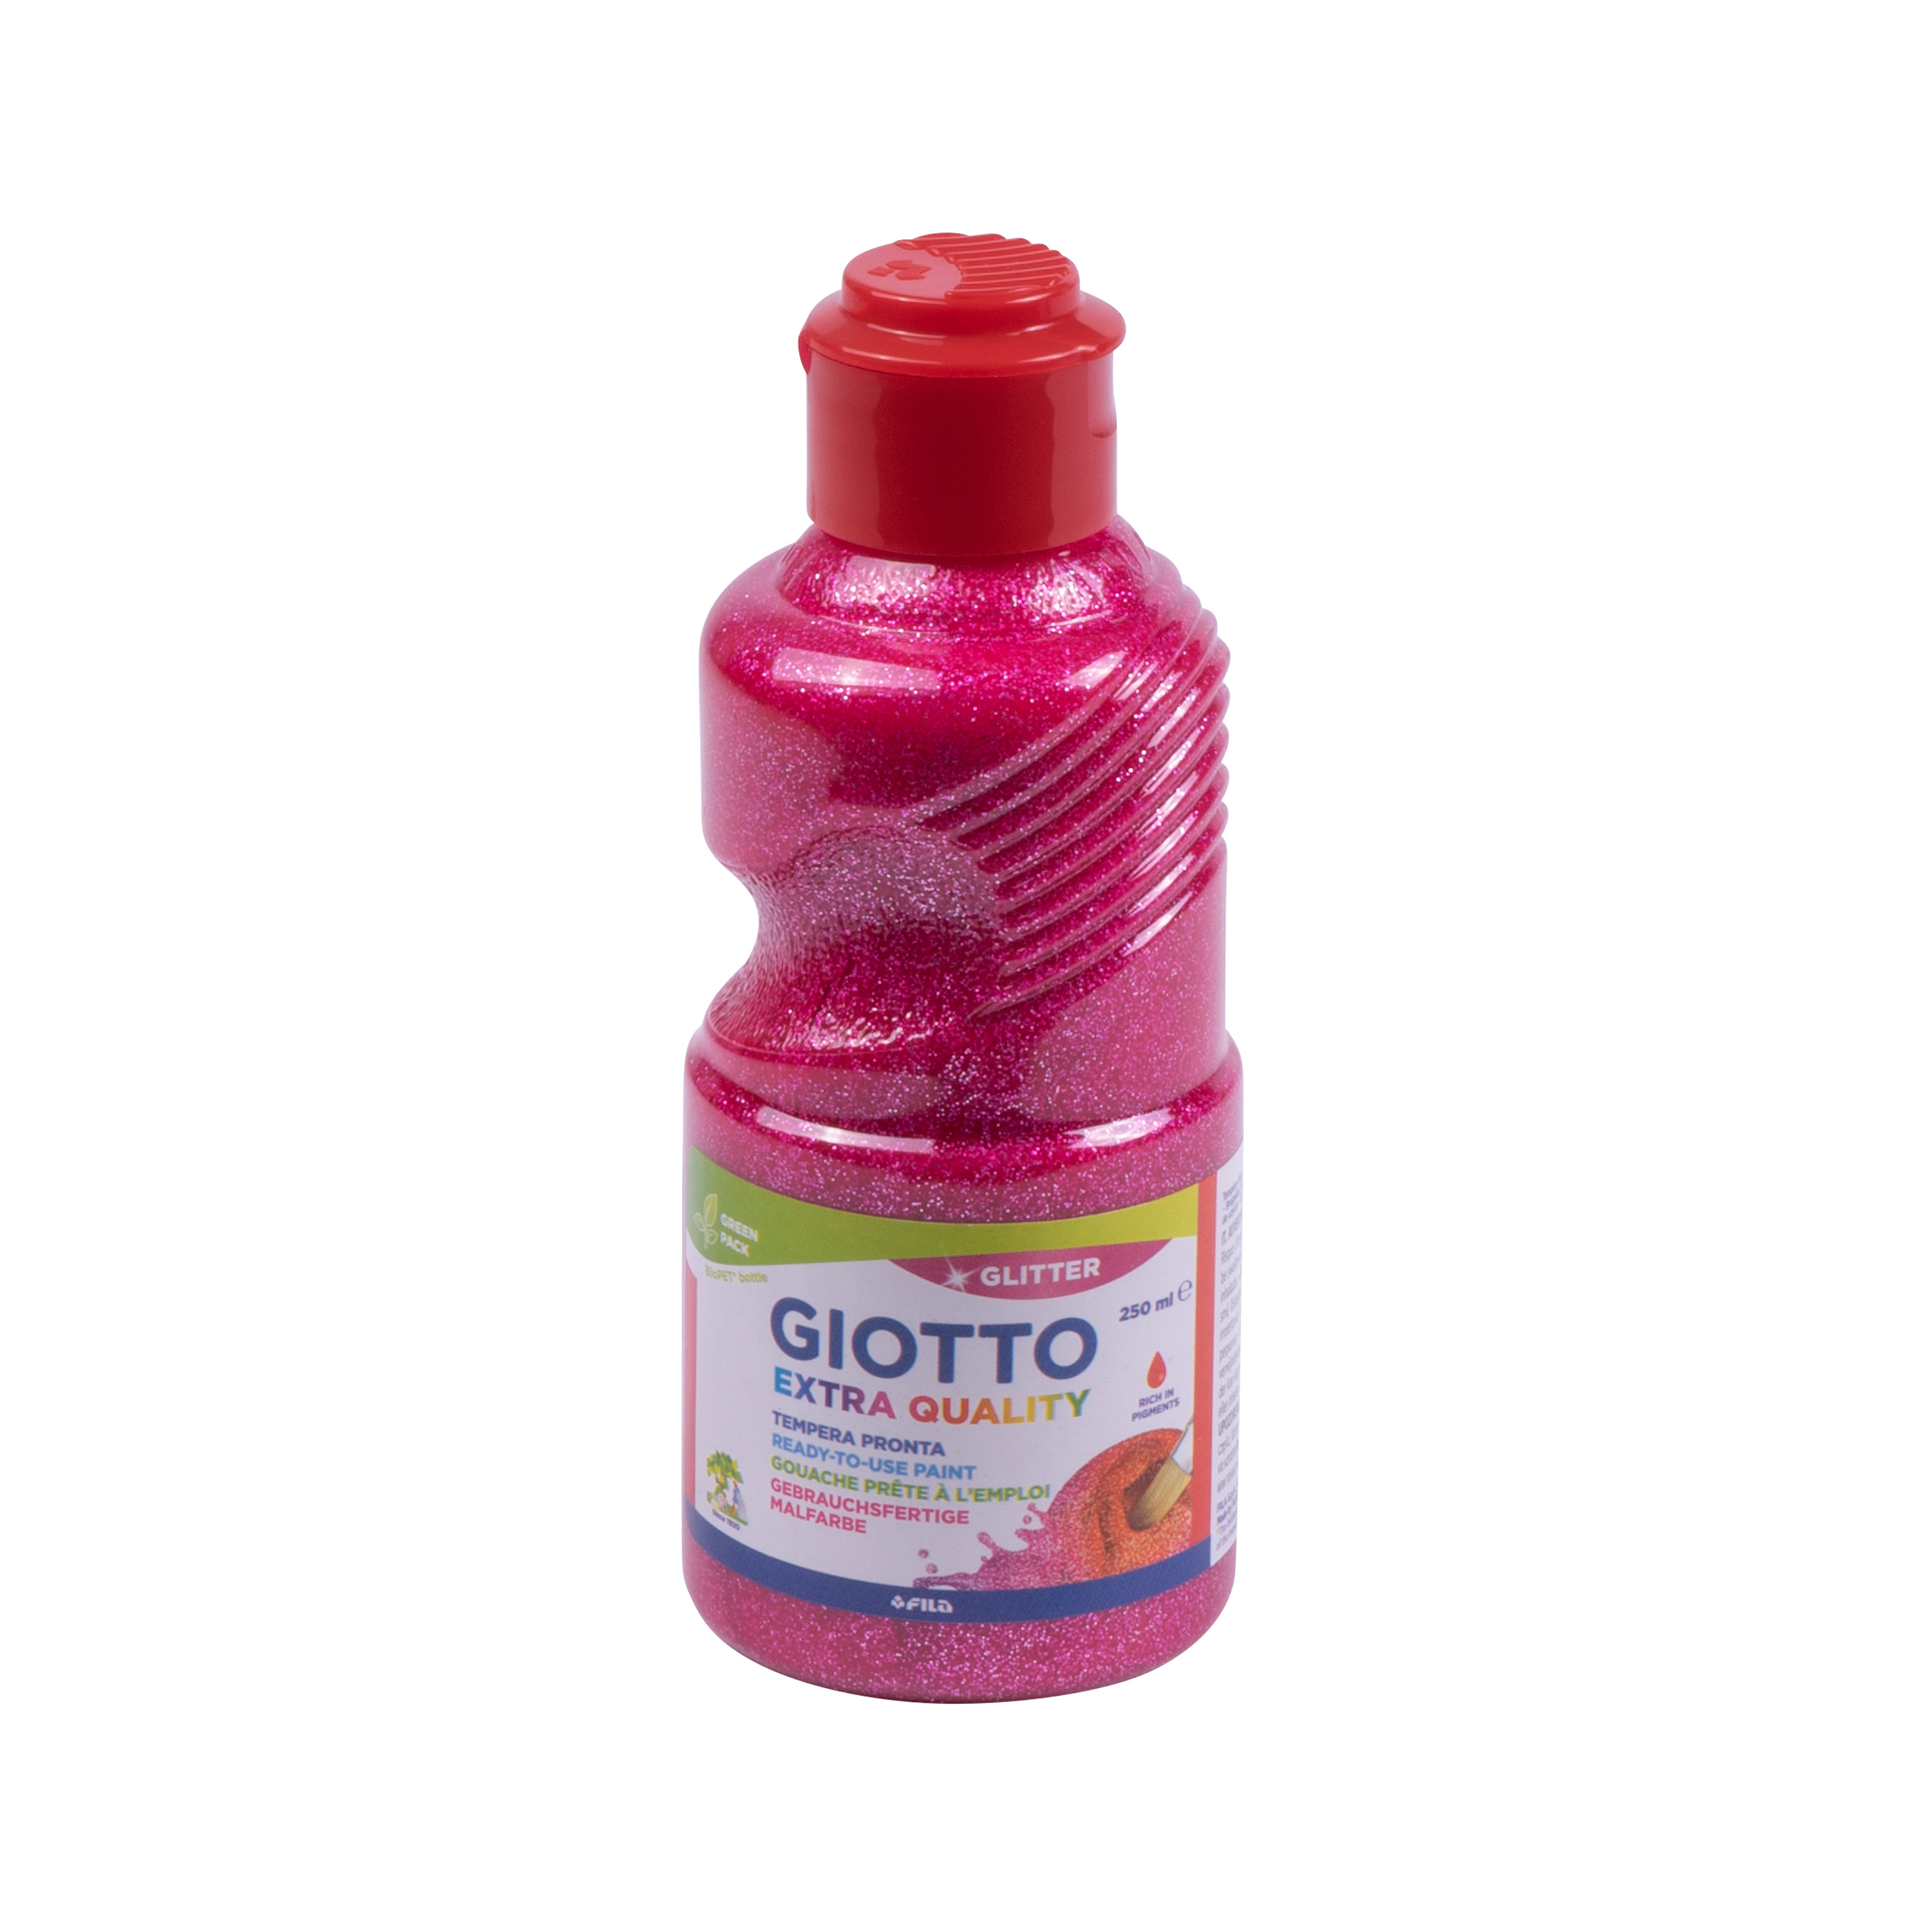 GIOTTO Glitter Paint 'pink', 250 ml je Flasche